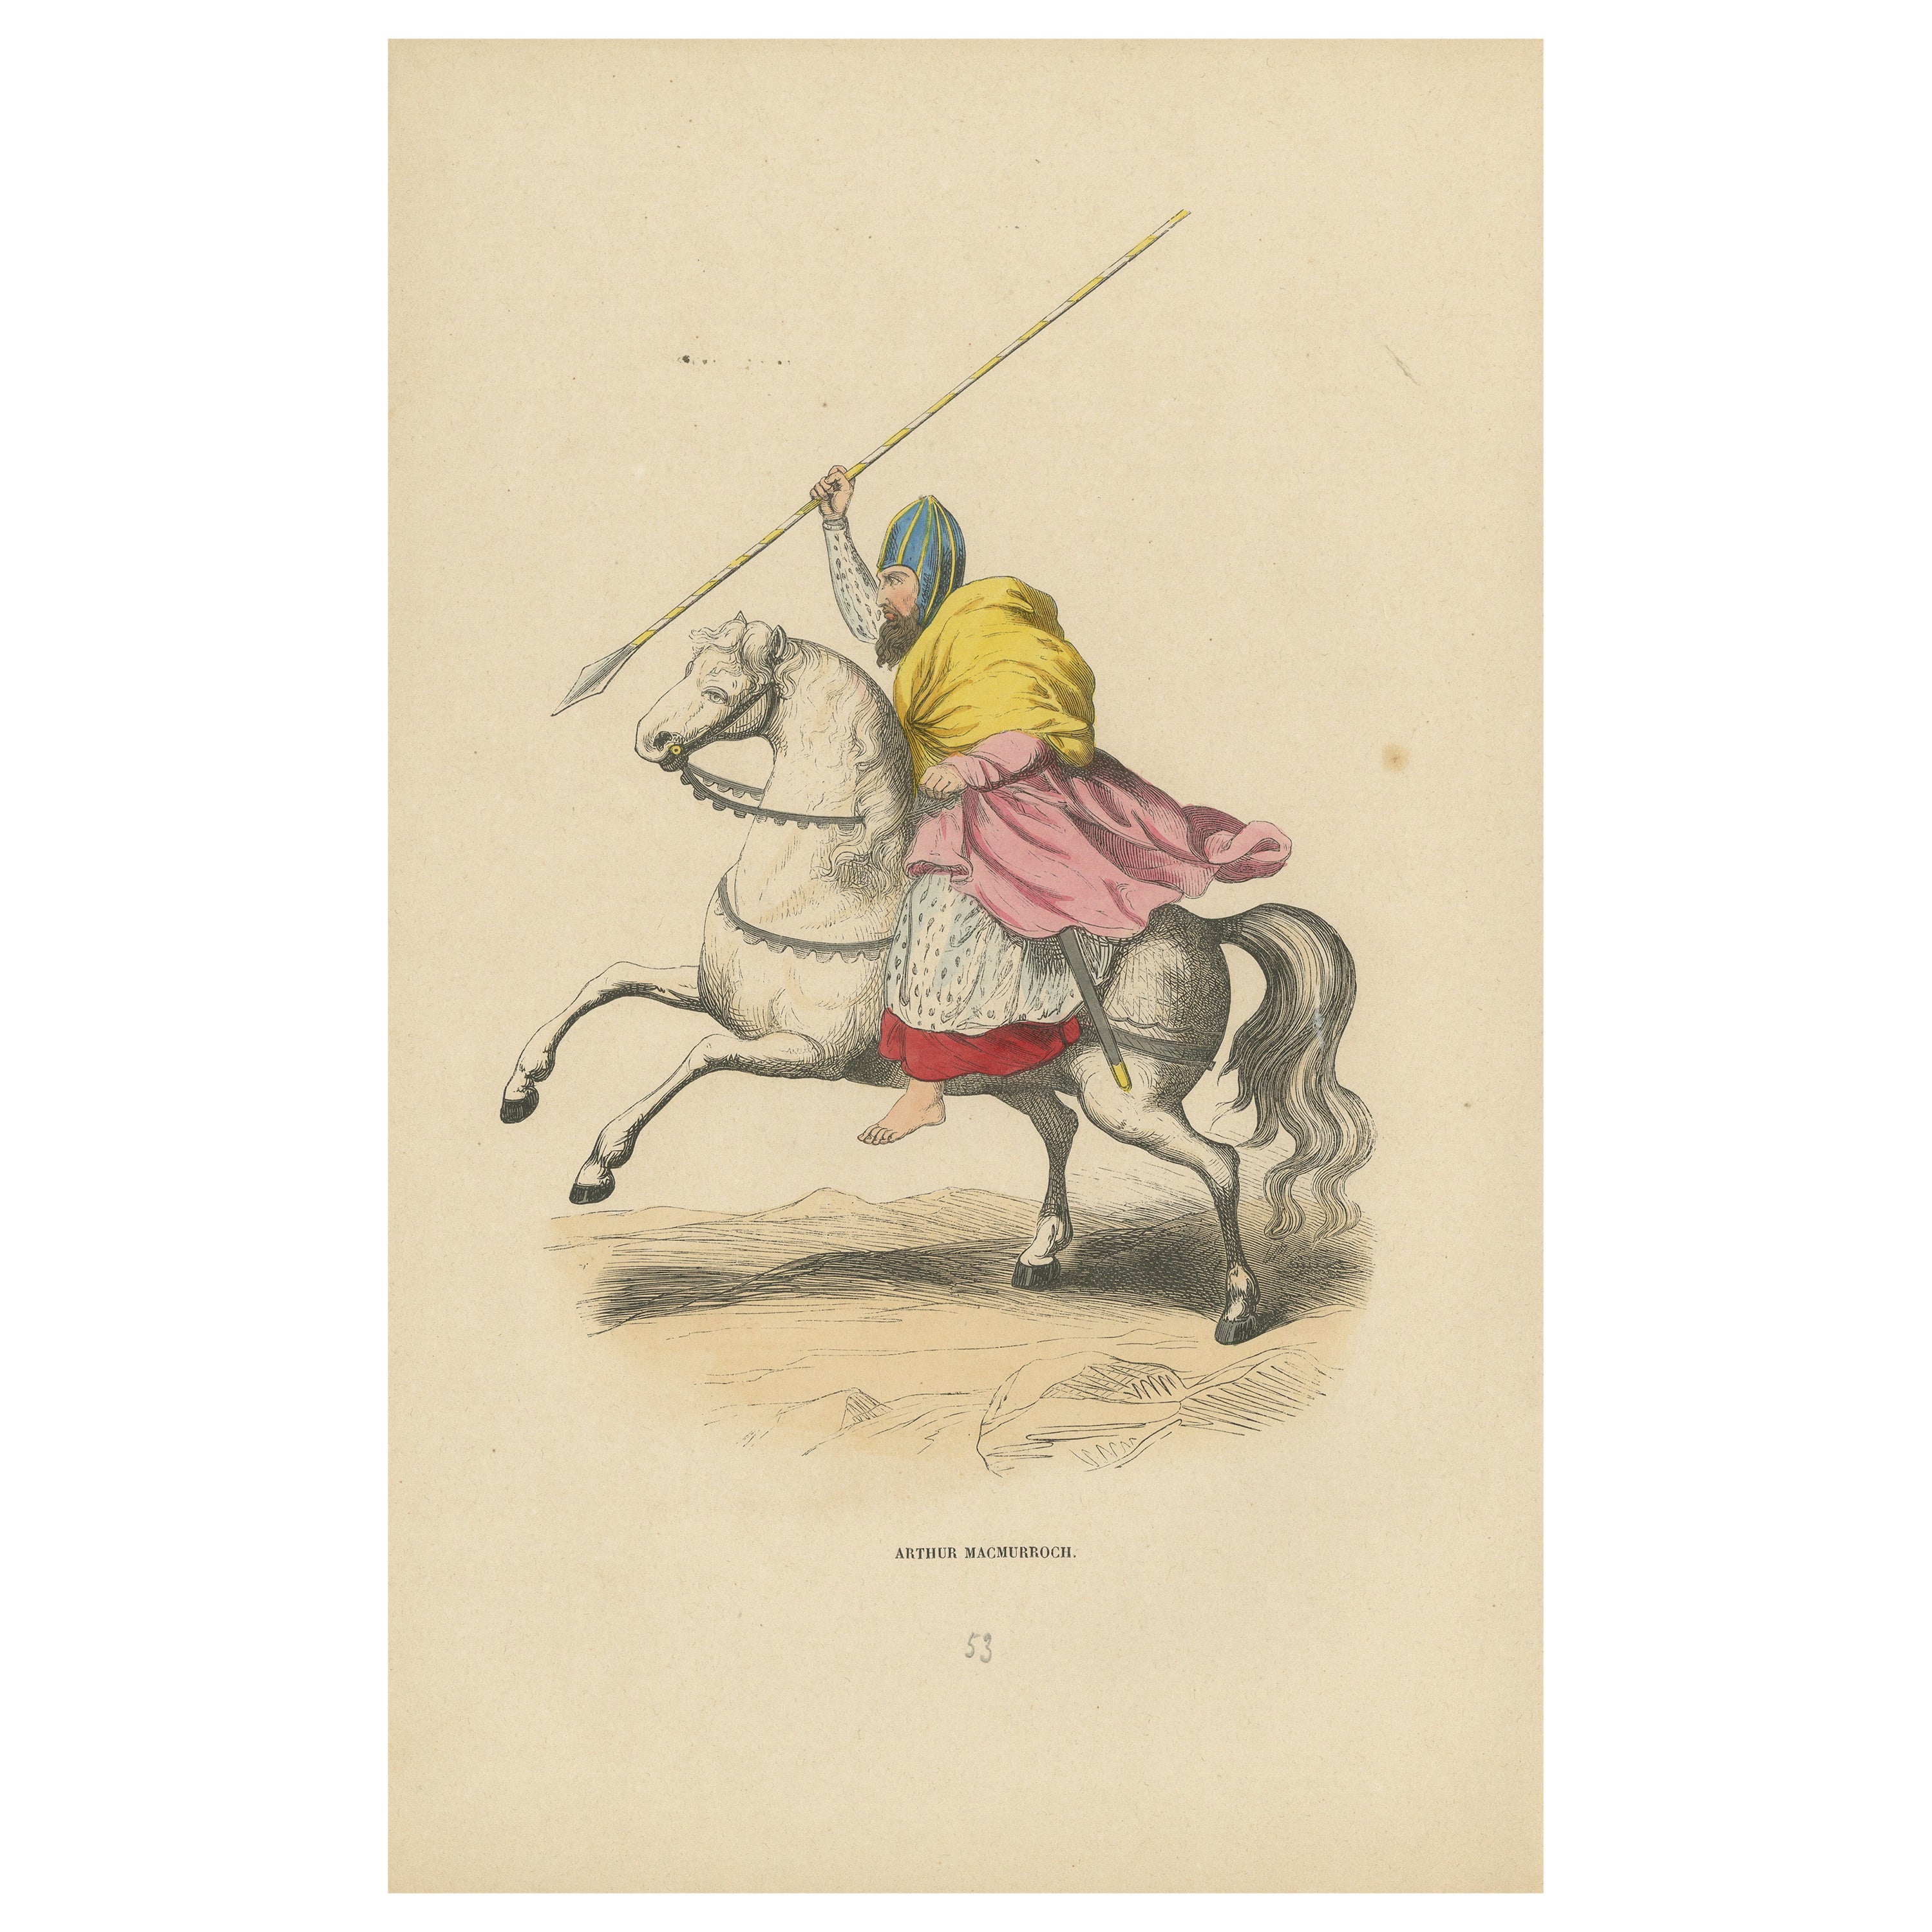 Arthur MacMurrough: The Irish Charging Chieftain, Lithograph Published in 1847 For Sale